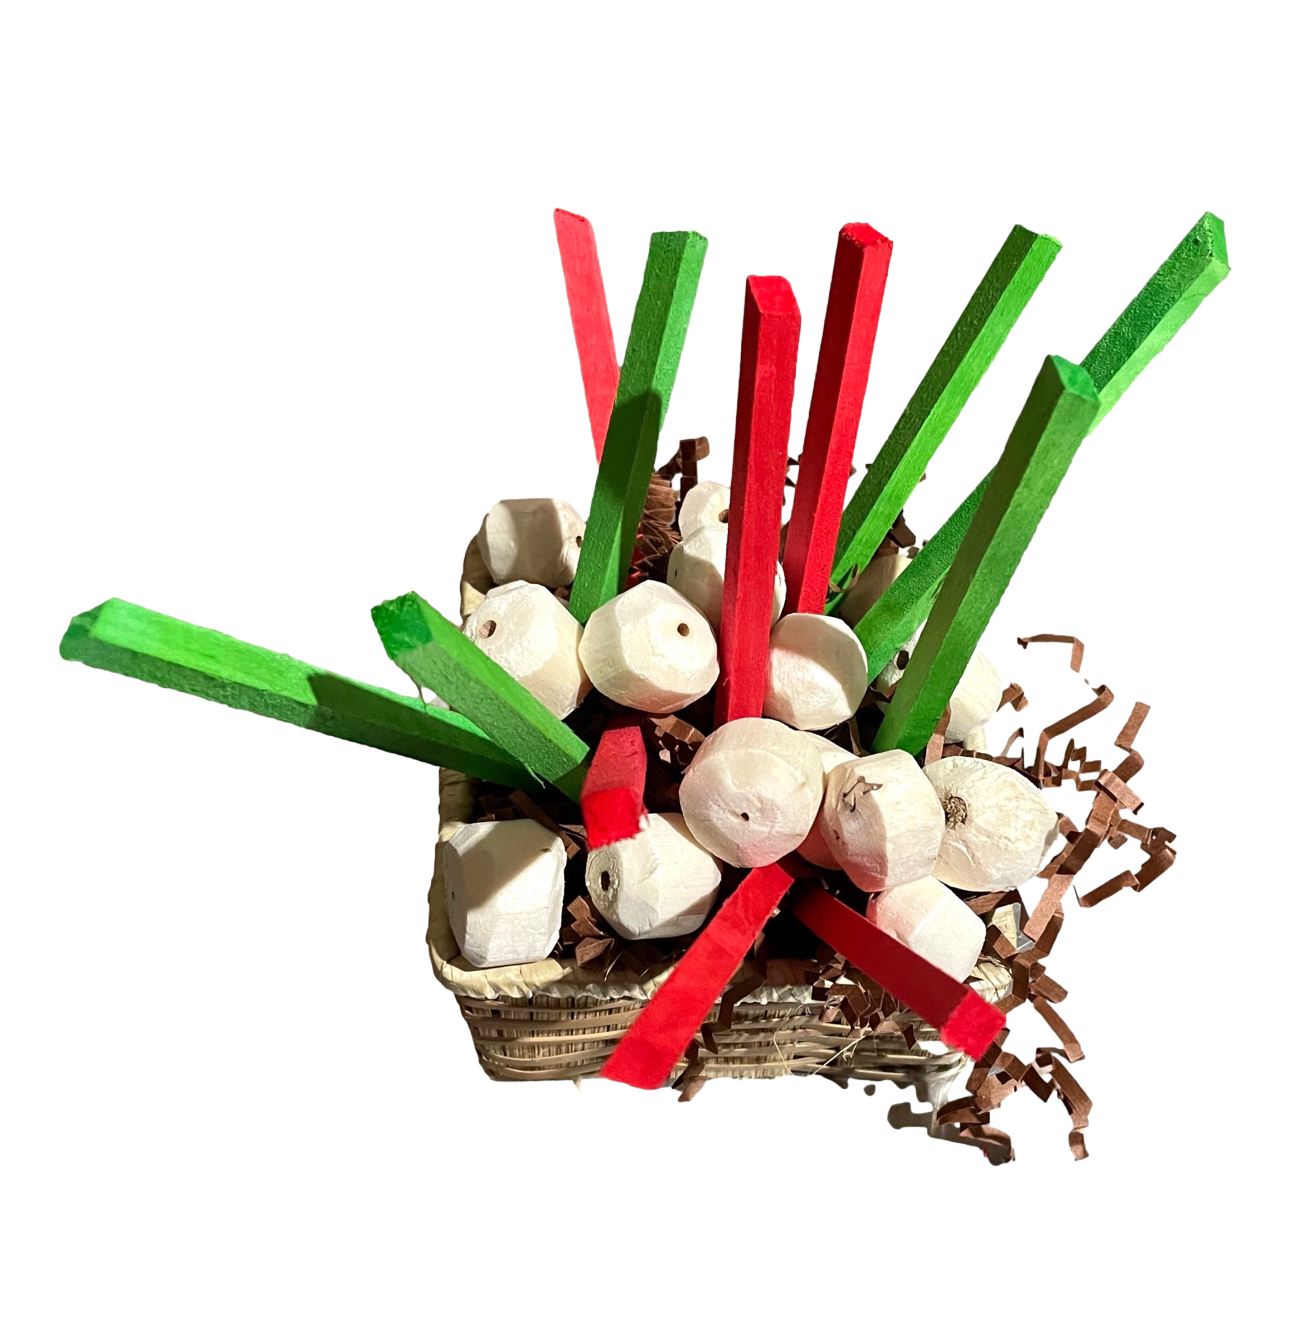 Festive Poutine Basswood Footie Grabbers and Foraging Basket by Feathered Addictions